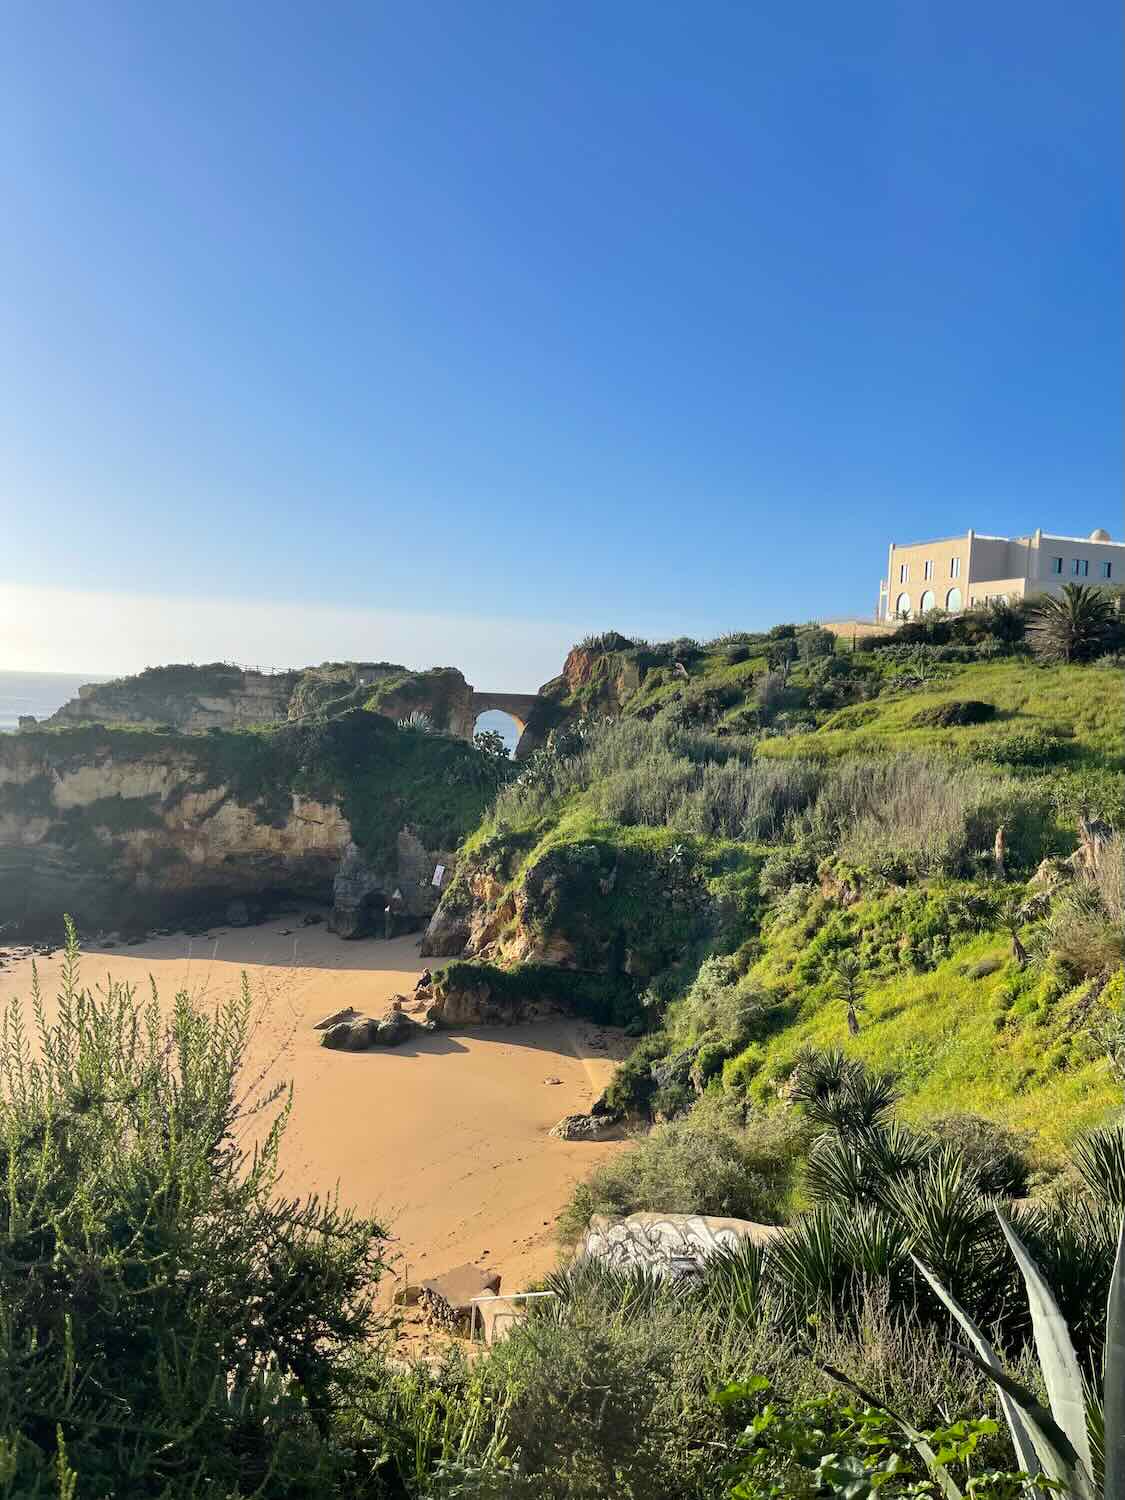 A lush green hill overlooking a secluded sandy beach with rocky cliffs and a stone arch bridge. A white building sits atop the hill, and the sky is clear and blue.